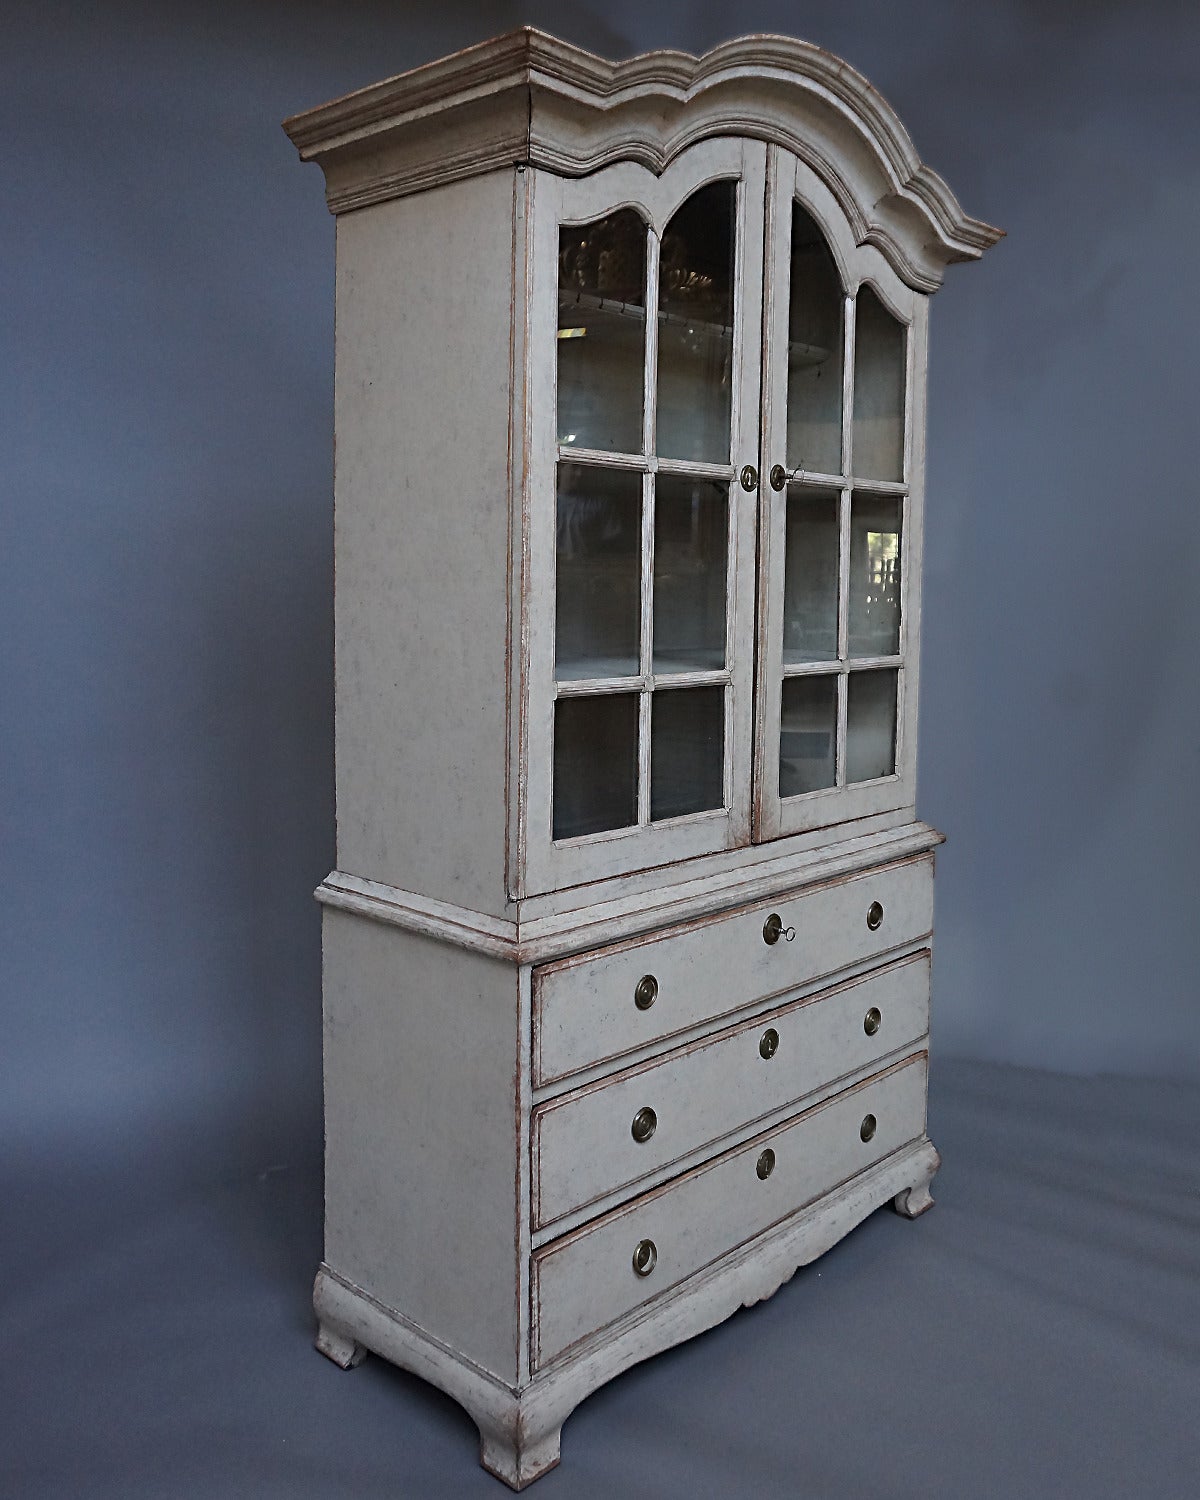 Period Swedish Rococo cabinet, circa 1820, with three shelves behind glazed doors on the upper section and three drawers below. Arched cornice and shaped bracket base, original glass and hardware.